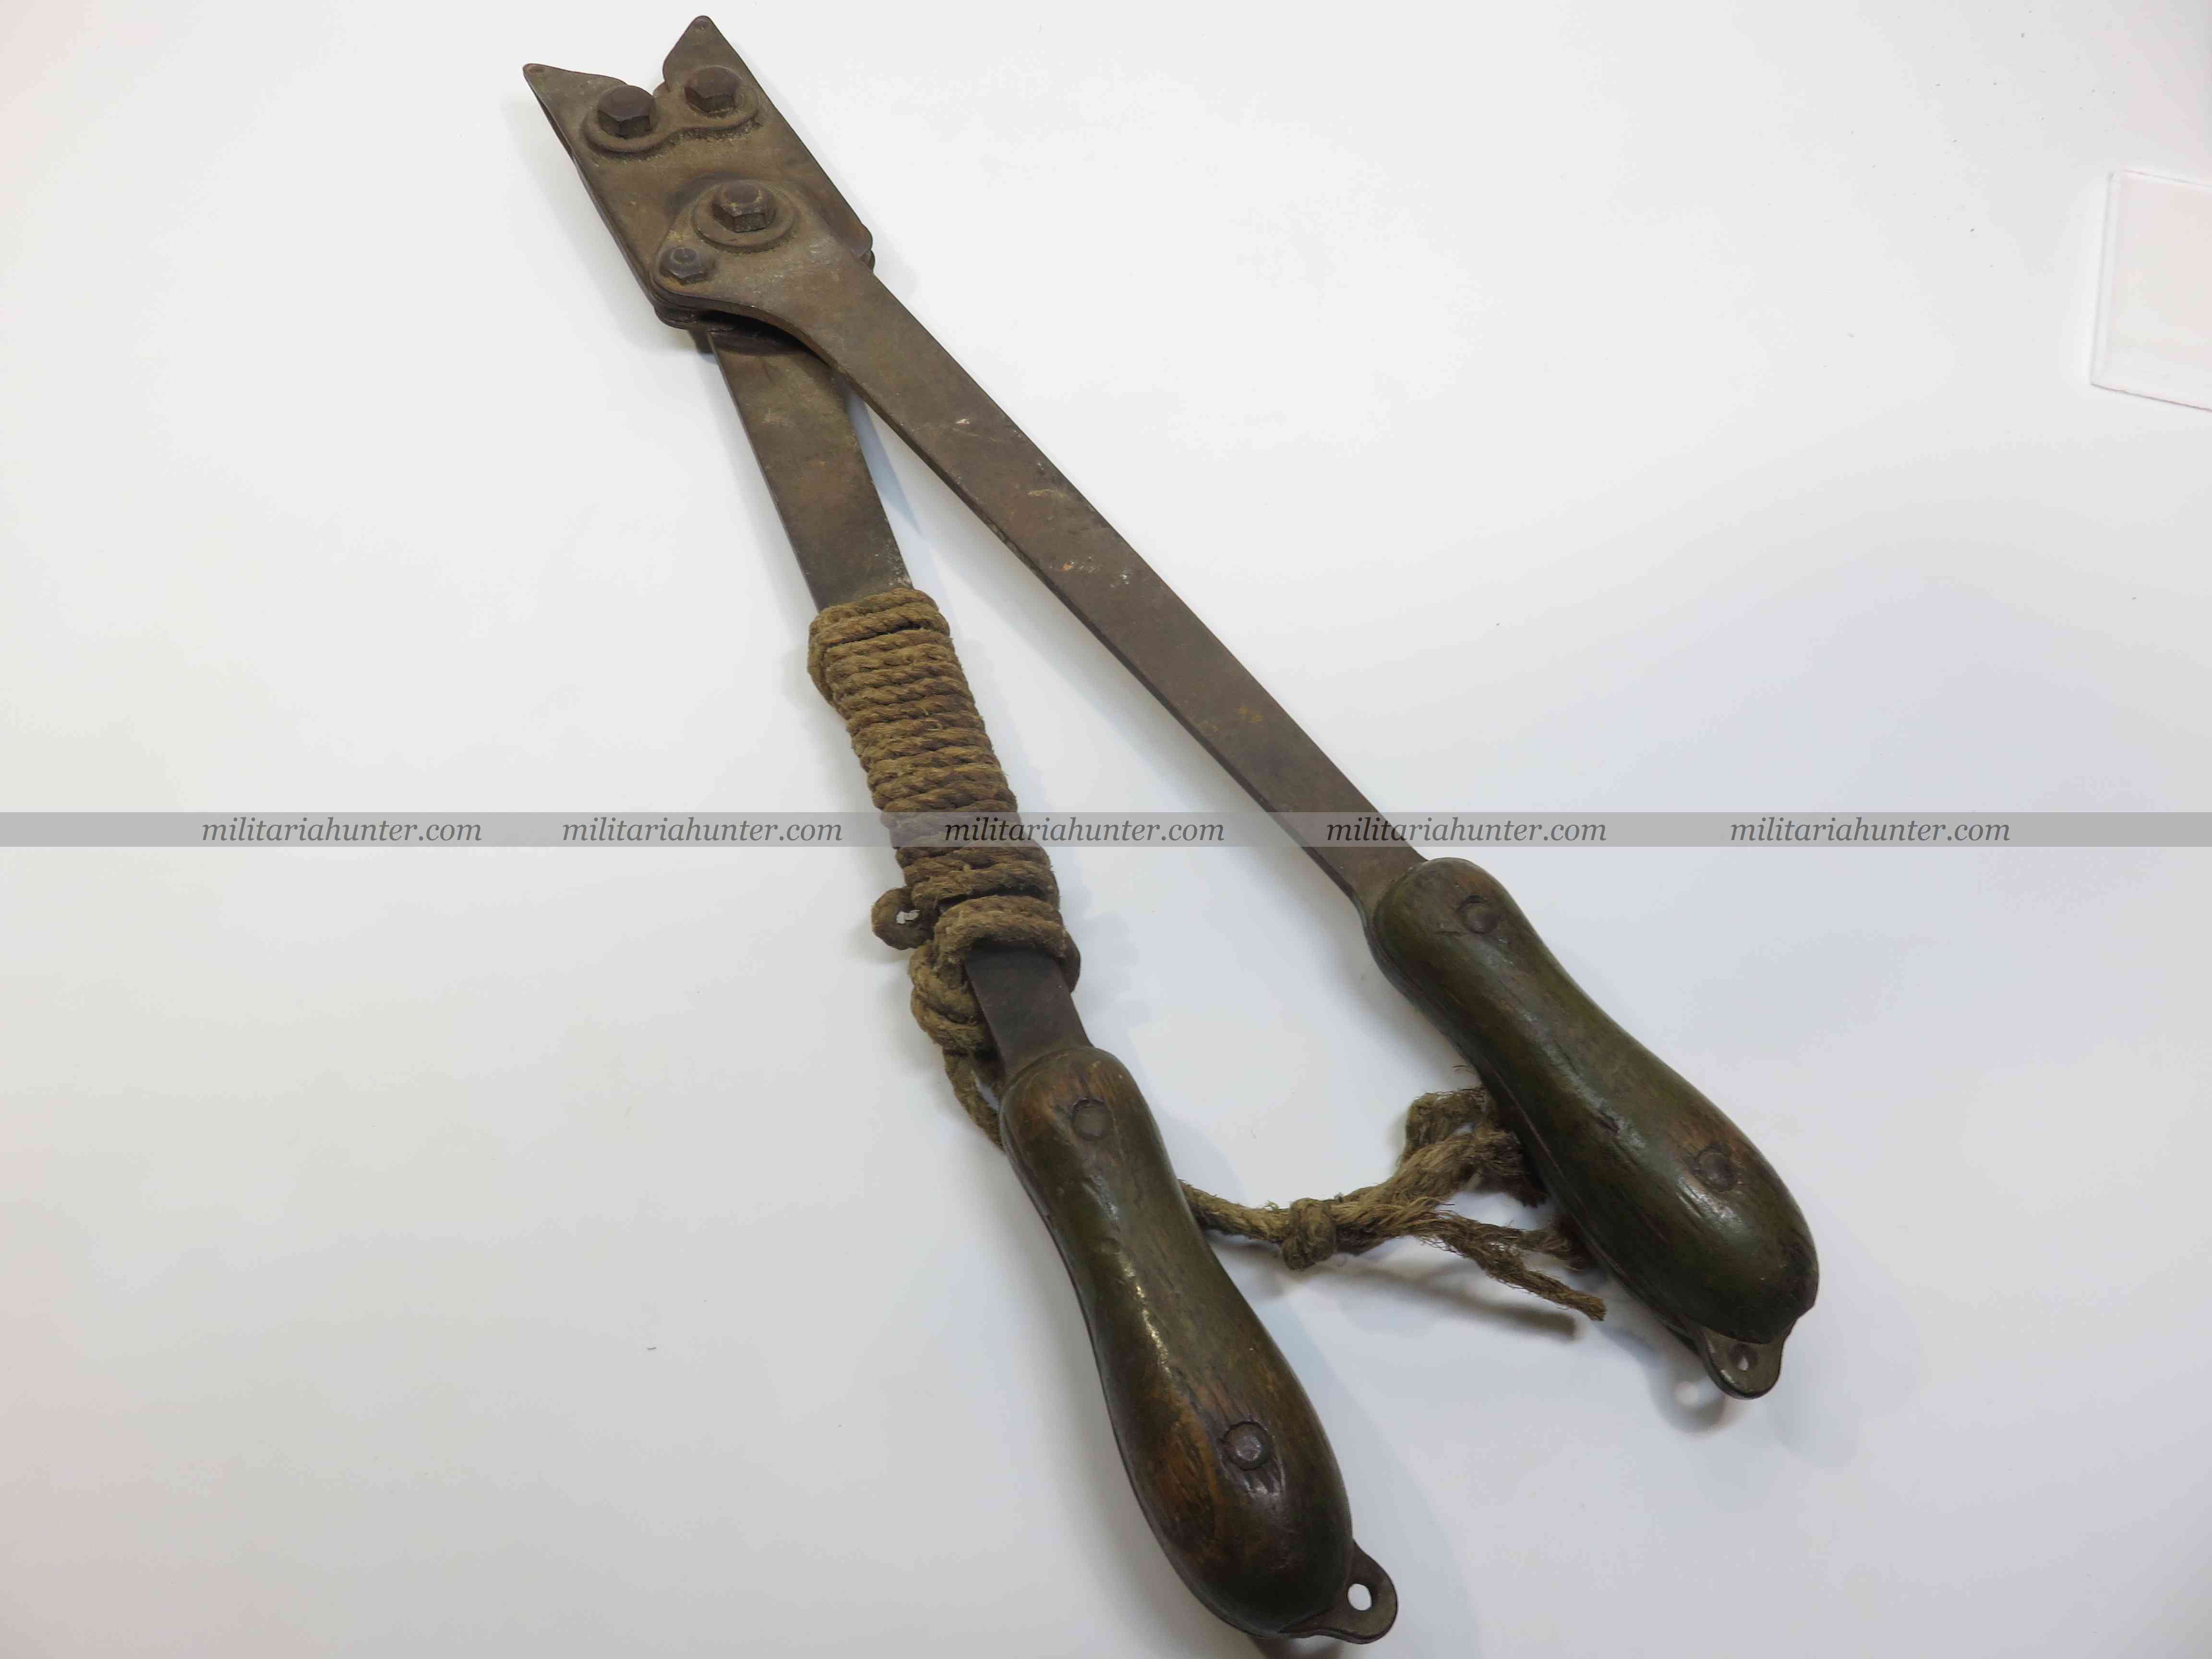 militaria : ww1 british large wire cutters - grande pince coupante anglaise 14-18